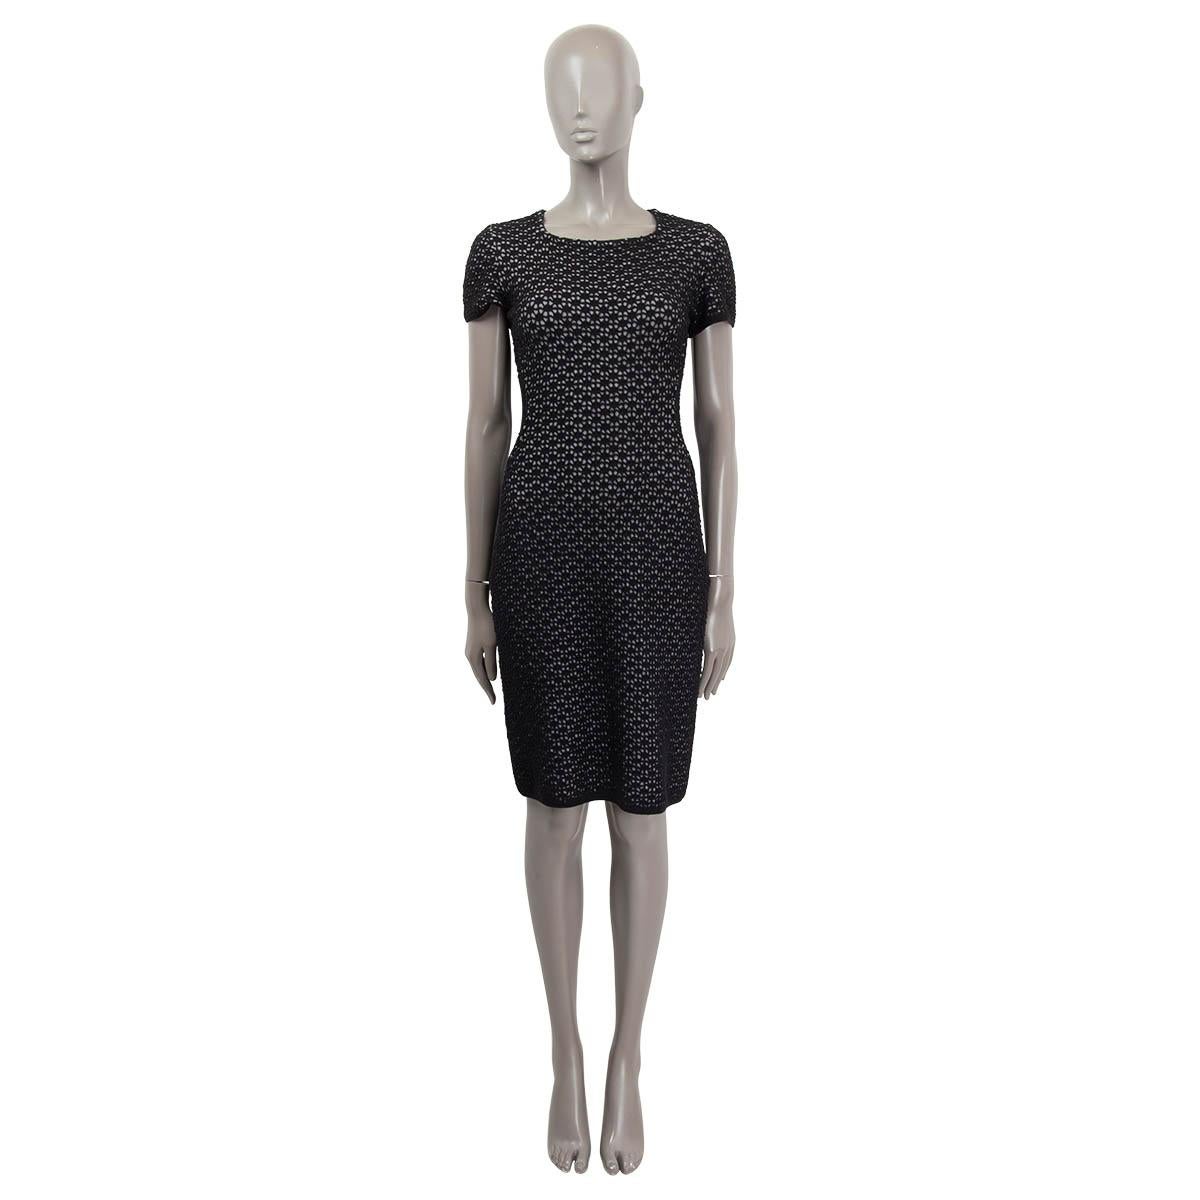 100% authentic Alaïa lattice knit dress in black and grey wool blend (missing tag). Featuring cap sleeves. Closes with invisible zipper on the back. Unlined. Has been worn and is in excellent condition. 

Measurements
Tag Size	S (Missing